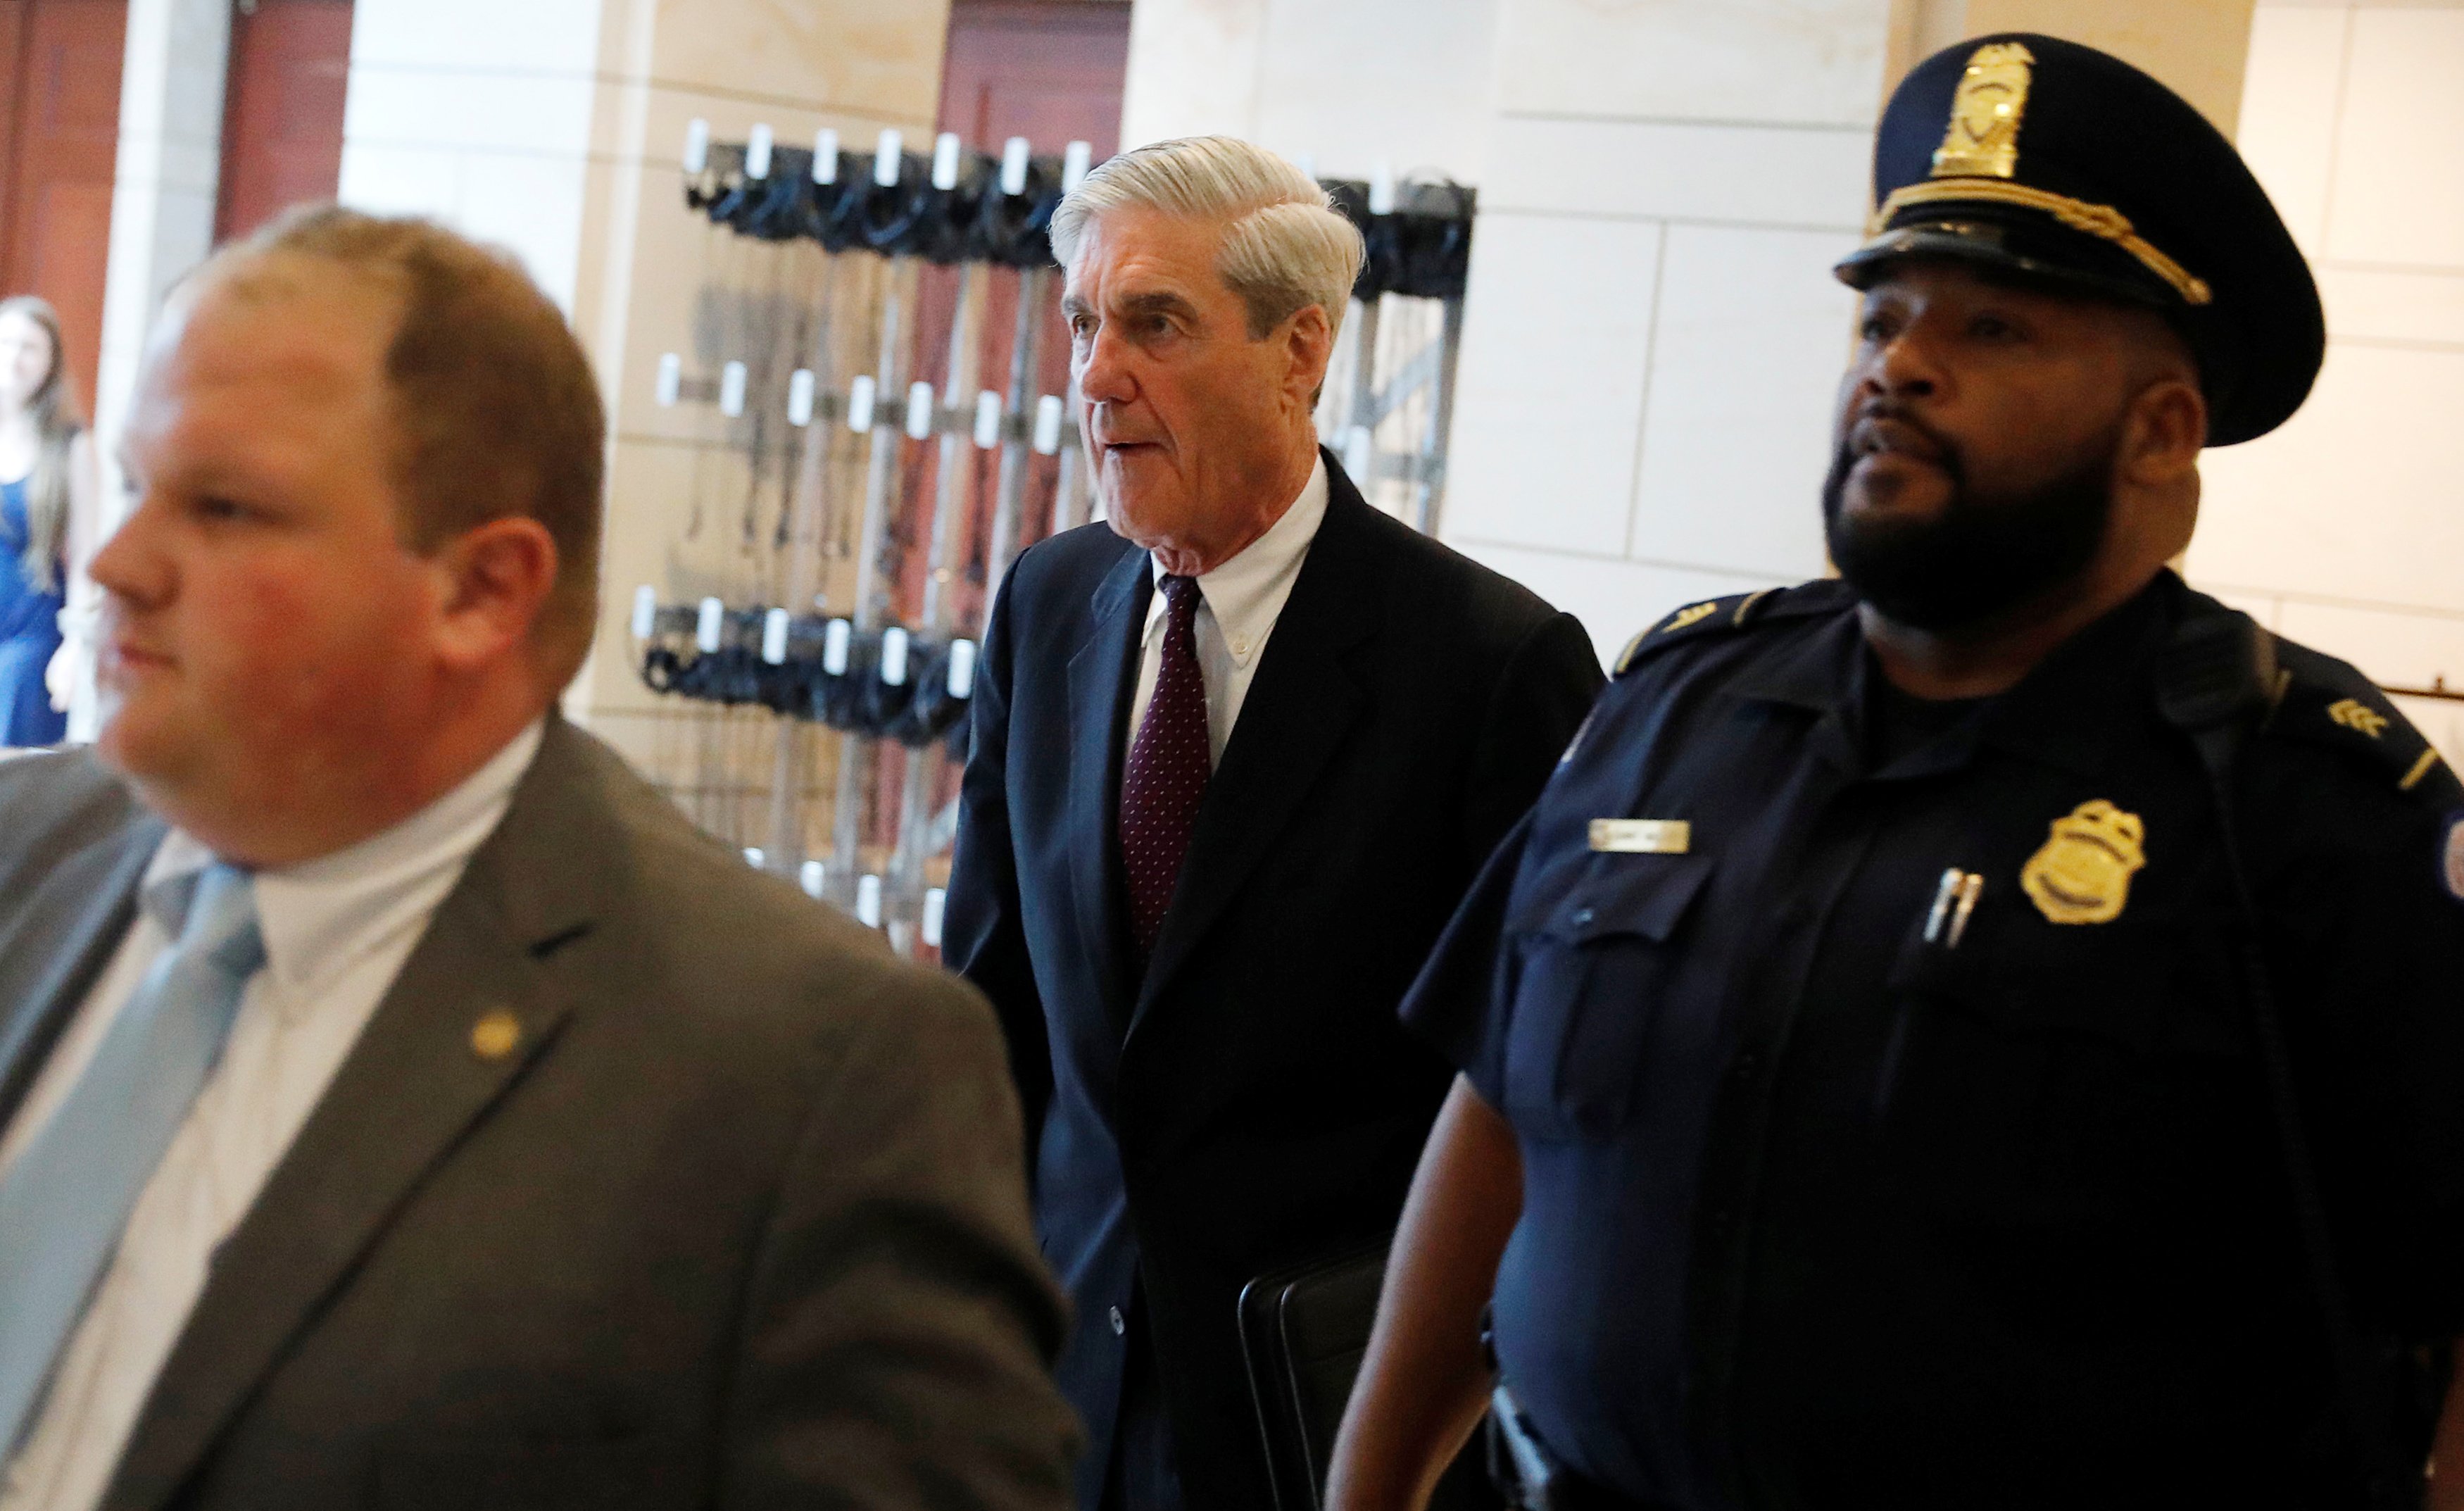 Special Counsel Robert Mueller departs after briefing the U.S. House Intelligence Committee on his investigation of potential collusion between Russia and the Trump campaign on Capitol Hill. REUTERS/Aaron P. Bernstein